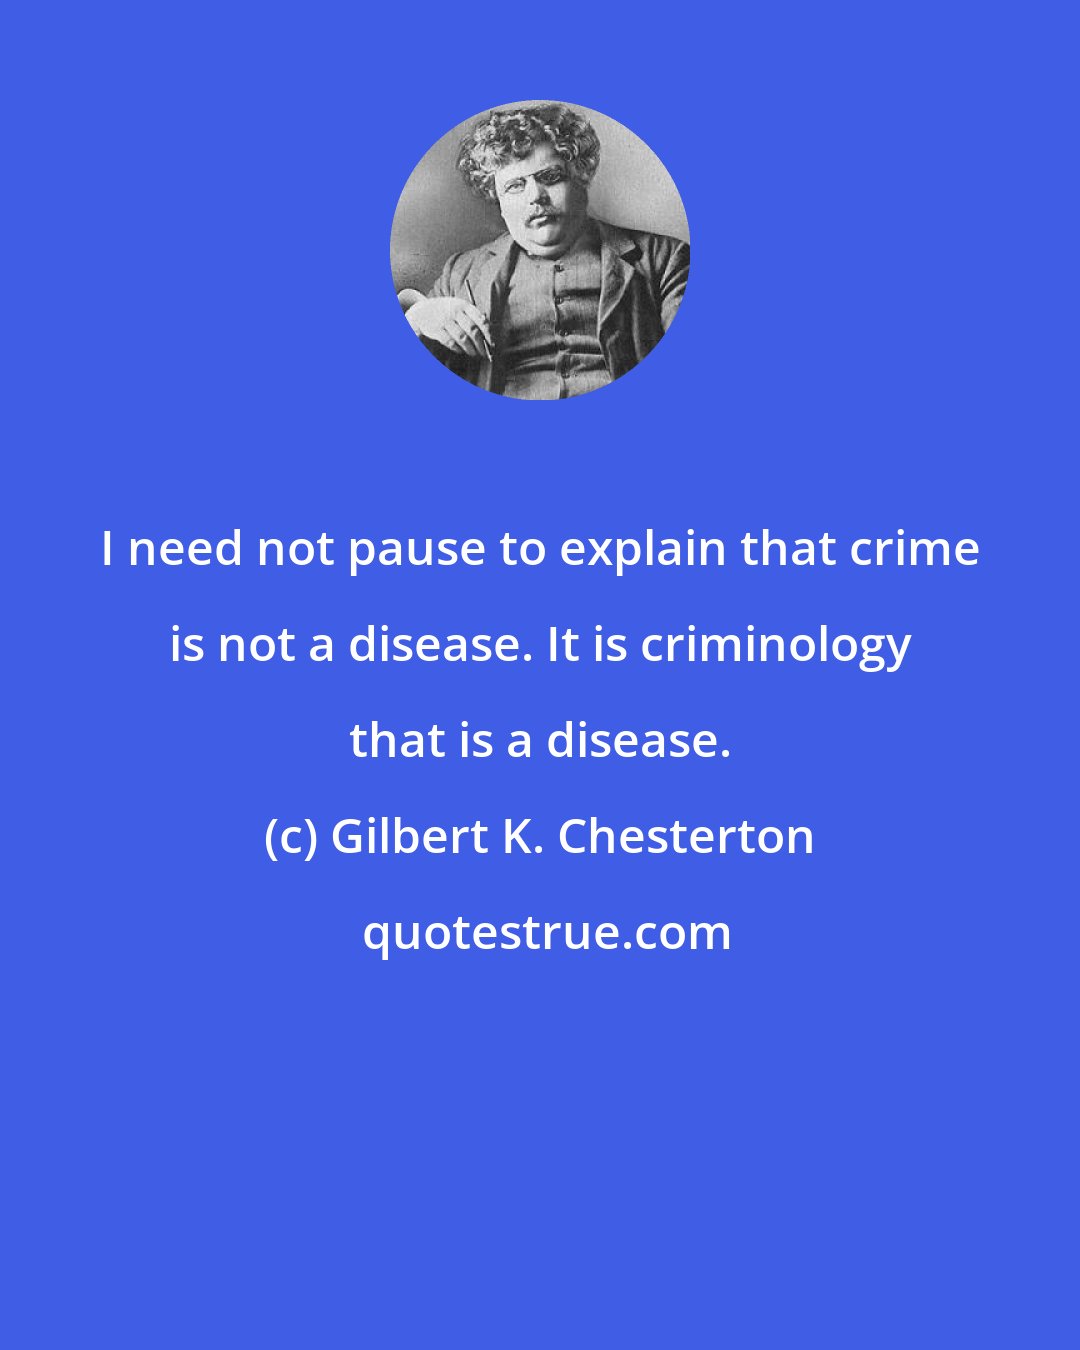 Gilbert K. Chesterton: I need not pause to explain that crime is not a disease. It is criminology that is a disease.